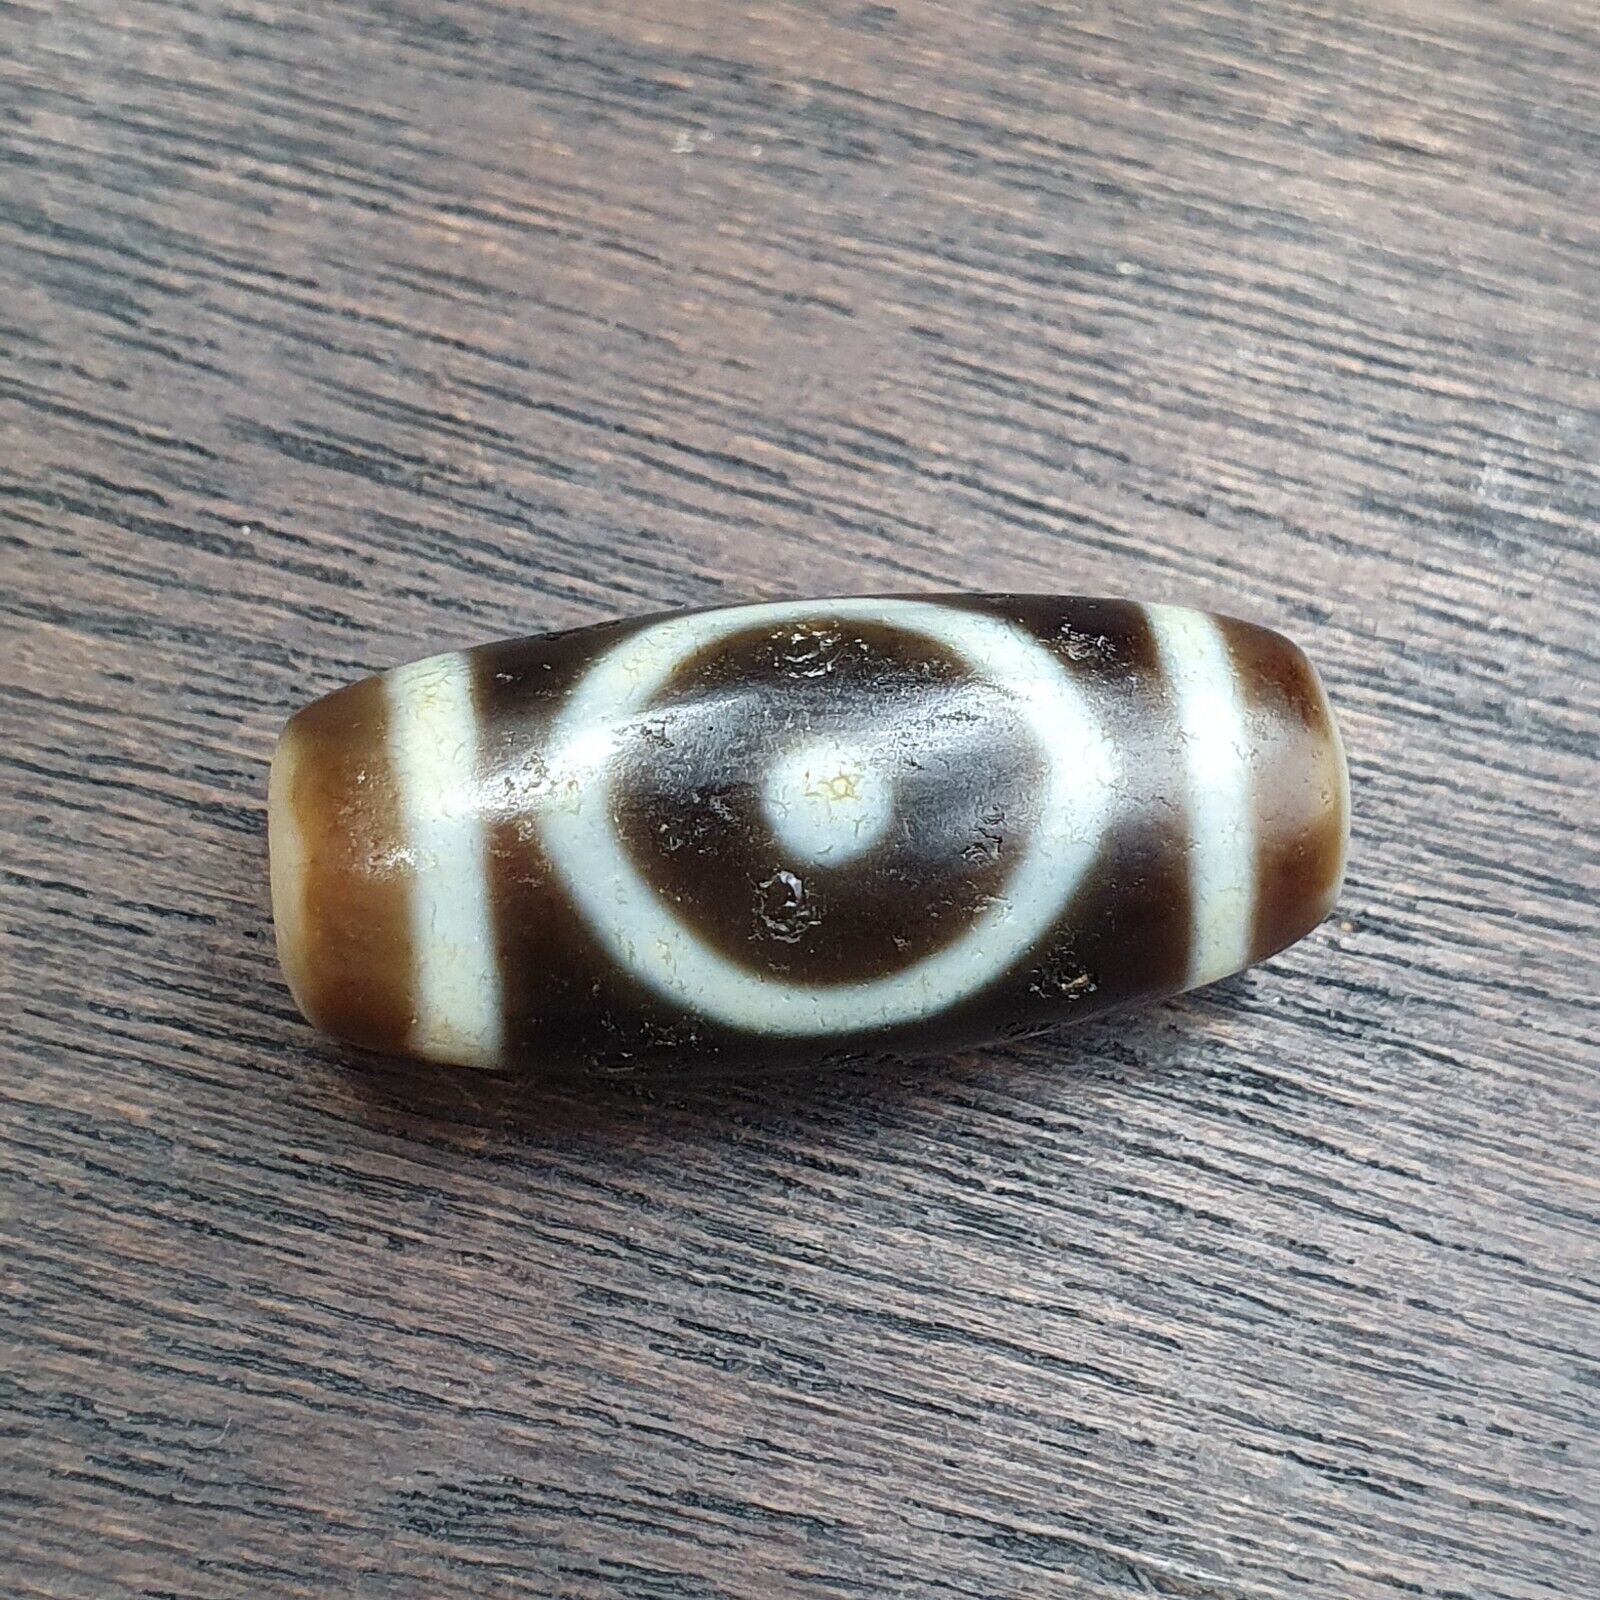 "Two antique Tibetan Agate Dzi beads, featuring a unique 'eyes circle squared' design, symbolizing protection and spiritual growth. These high-quality beads, designated as OTB8-4, are highly valued for their cultural significance, rarity, and believed to bring good fortune, prosperity, and blessings to the wearer as an amulet."